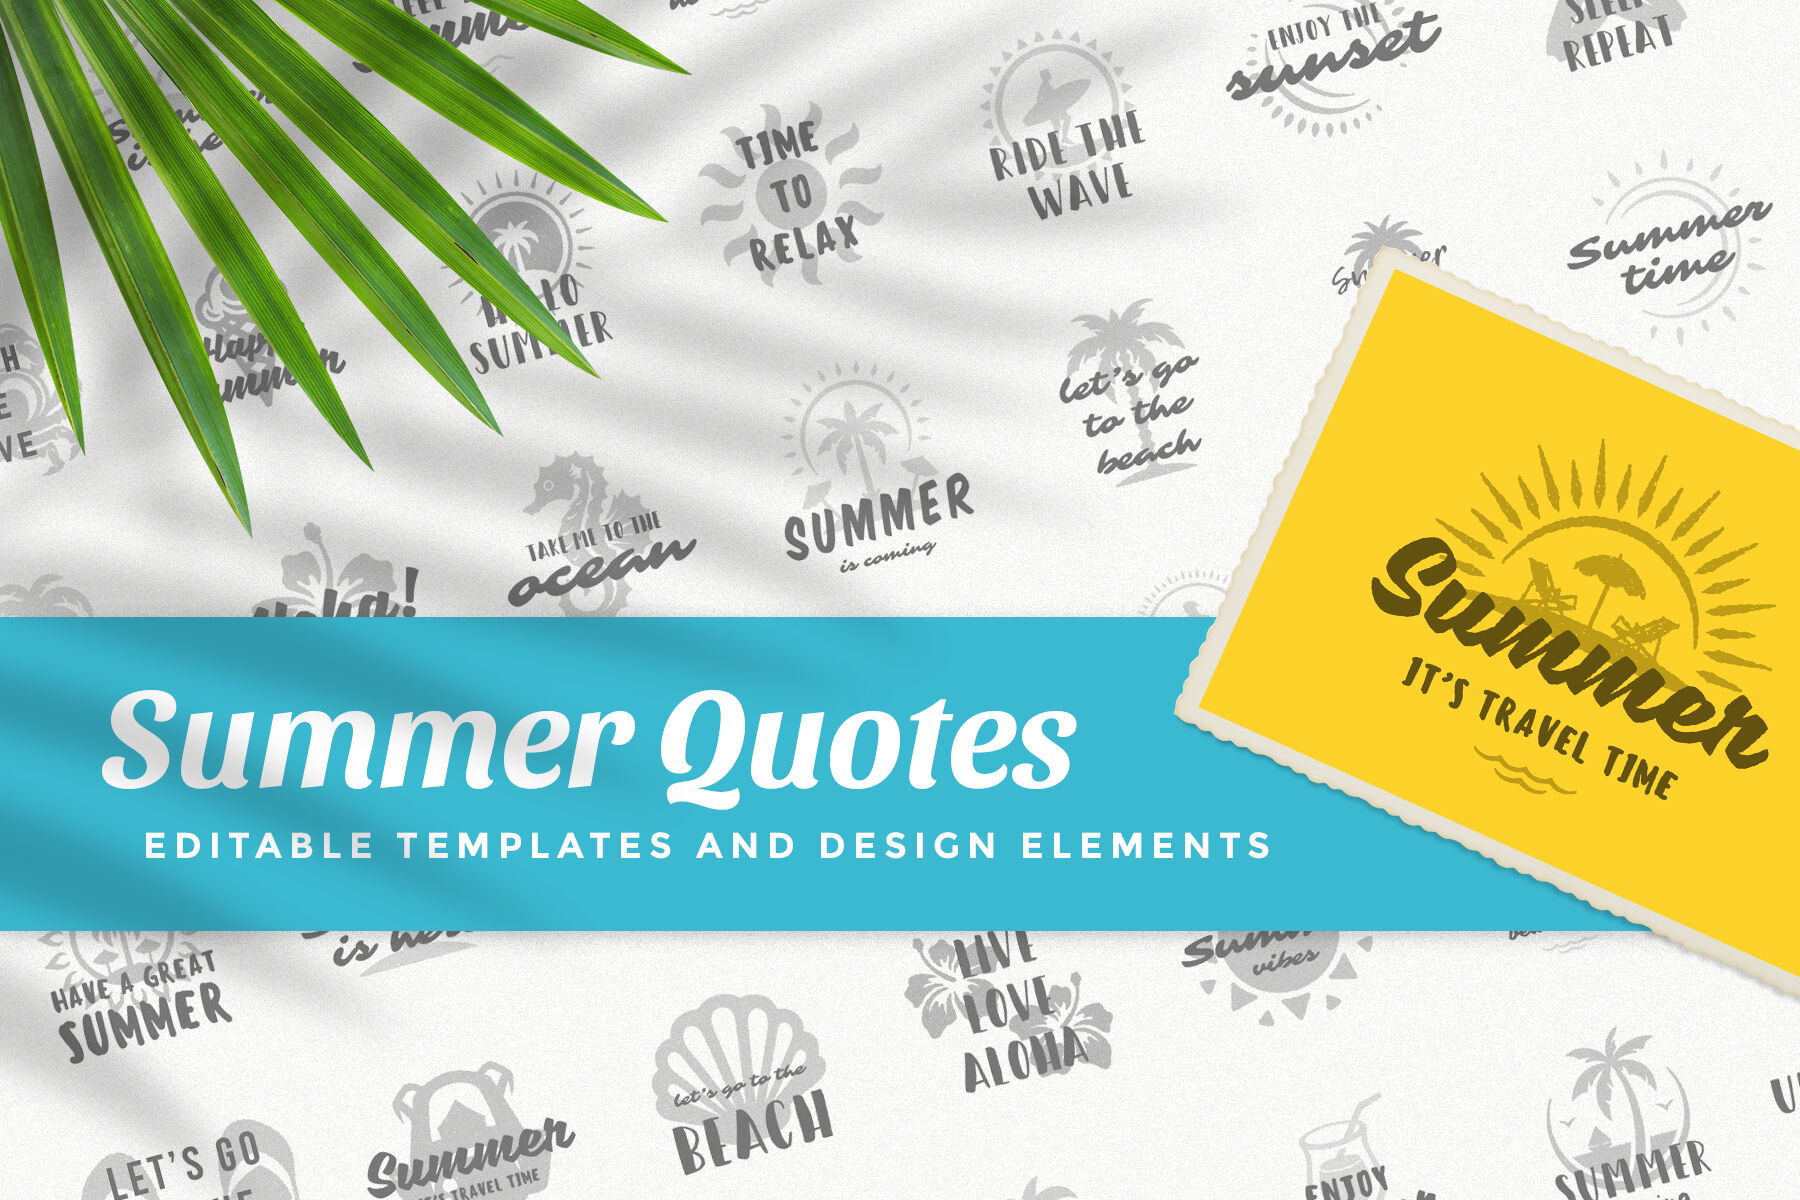 have a great summer quotes